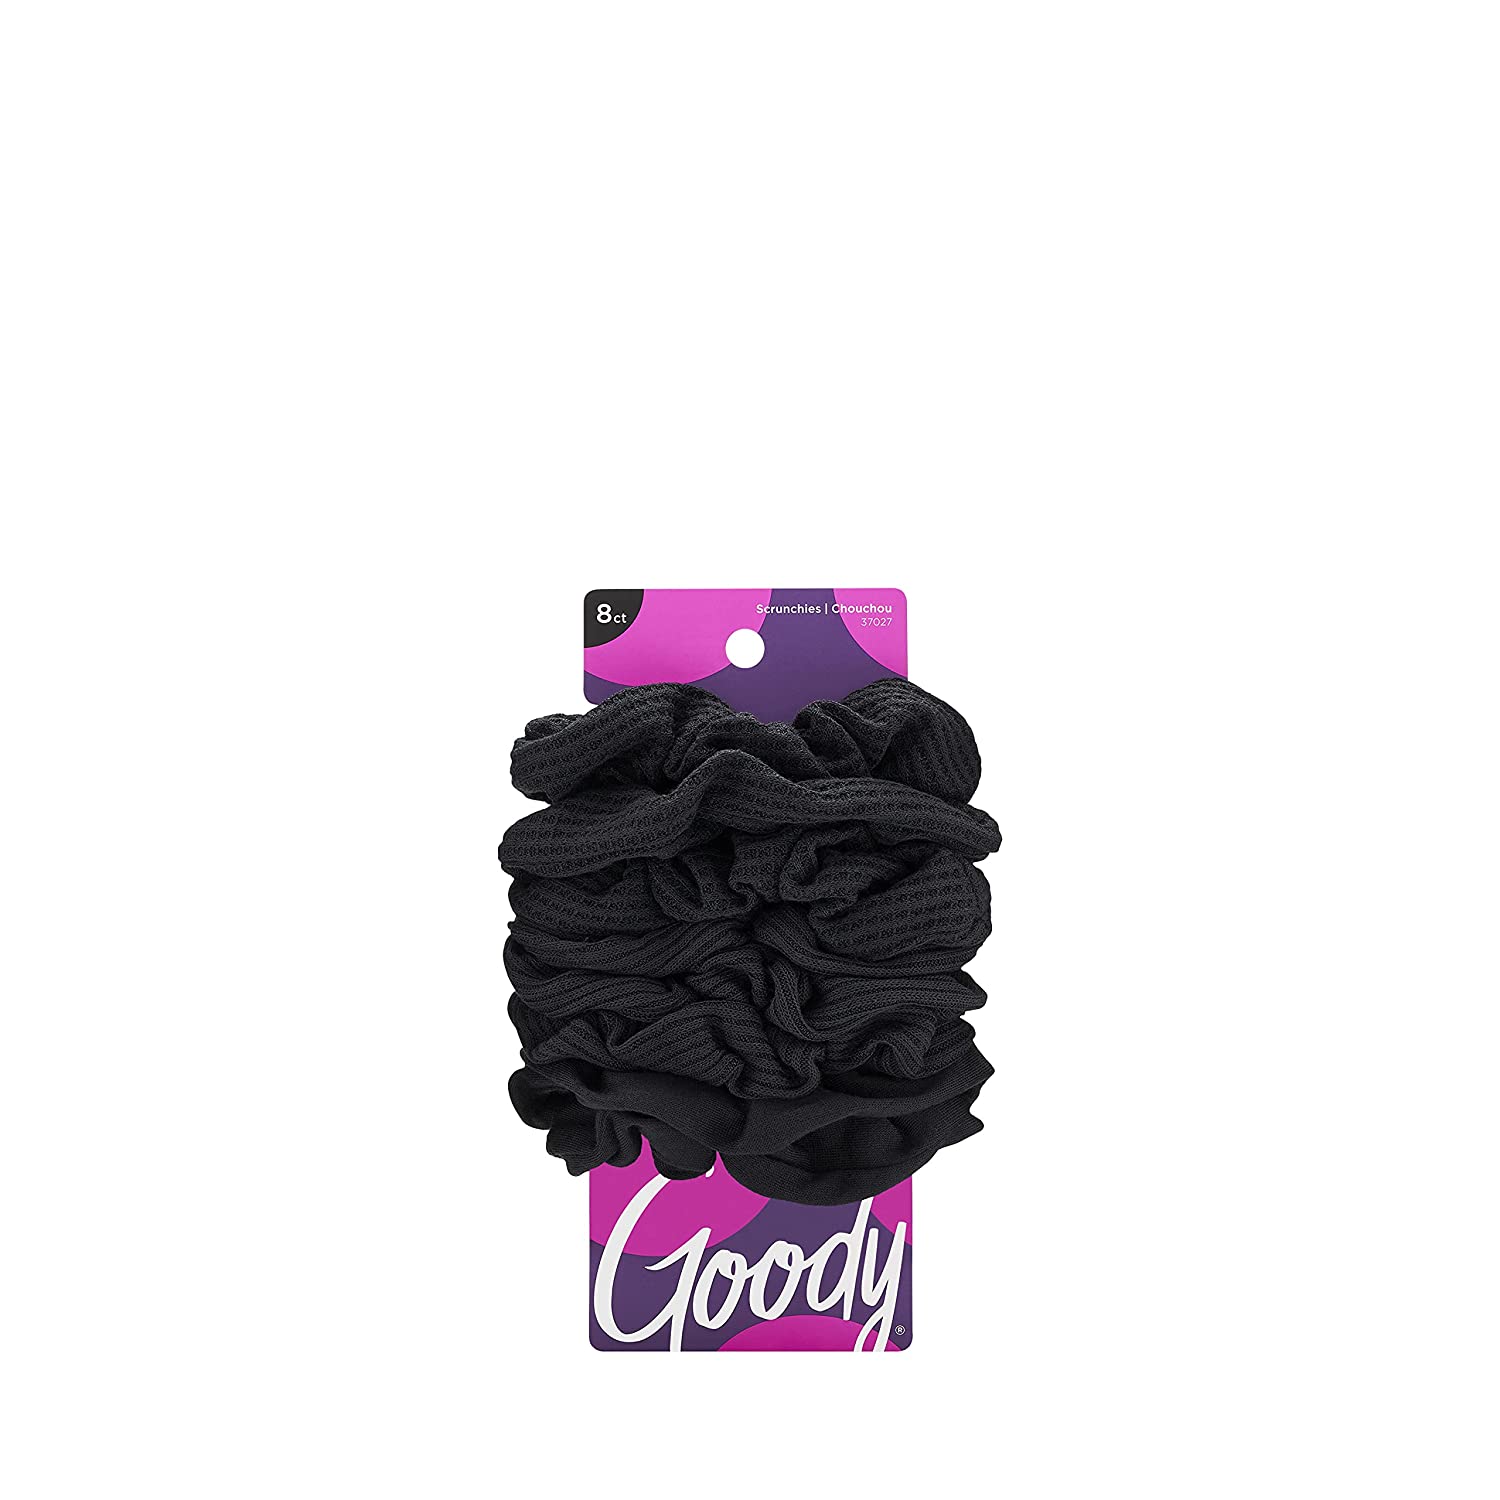 Goody Ouchless Hair Scrunchie, 8-Count